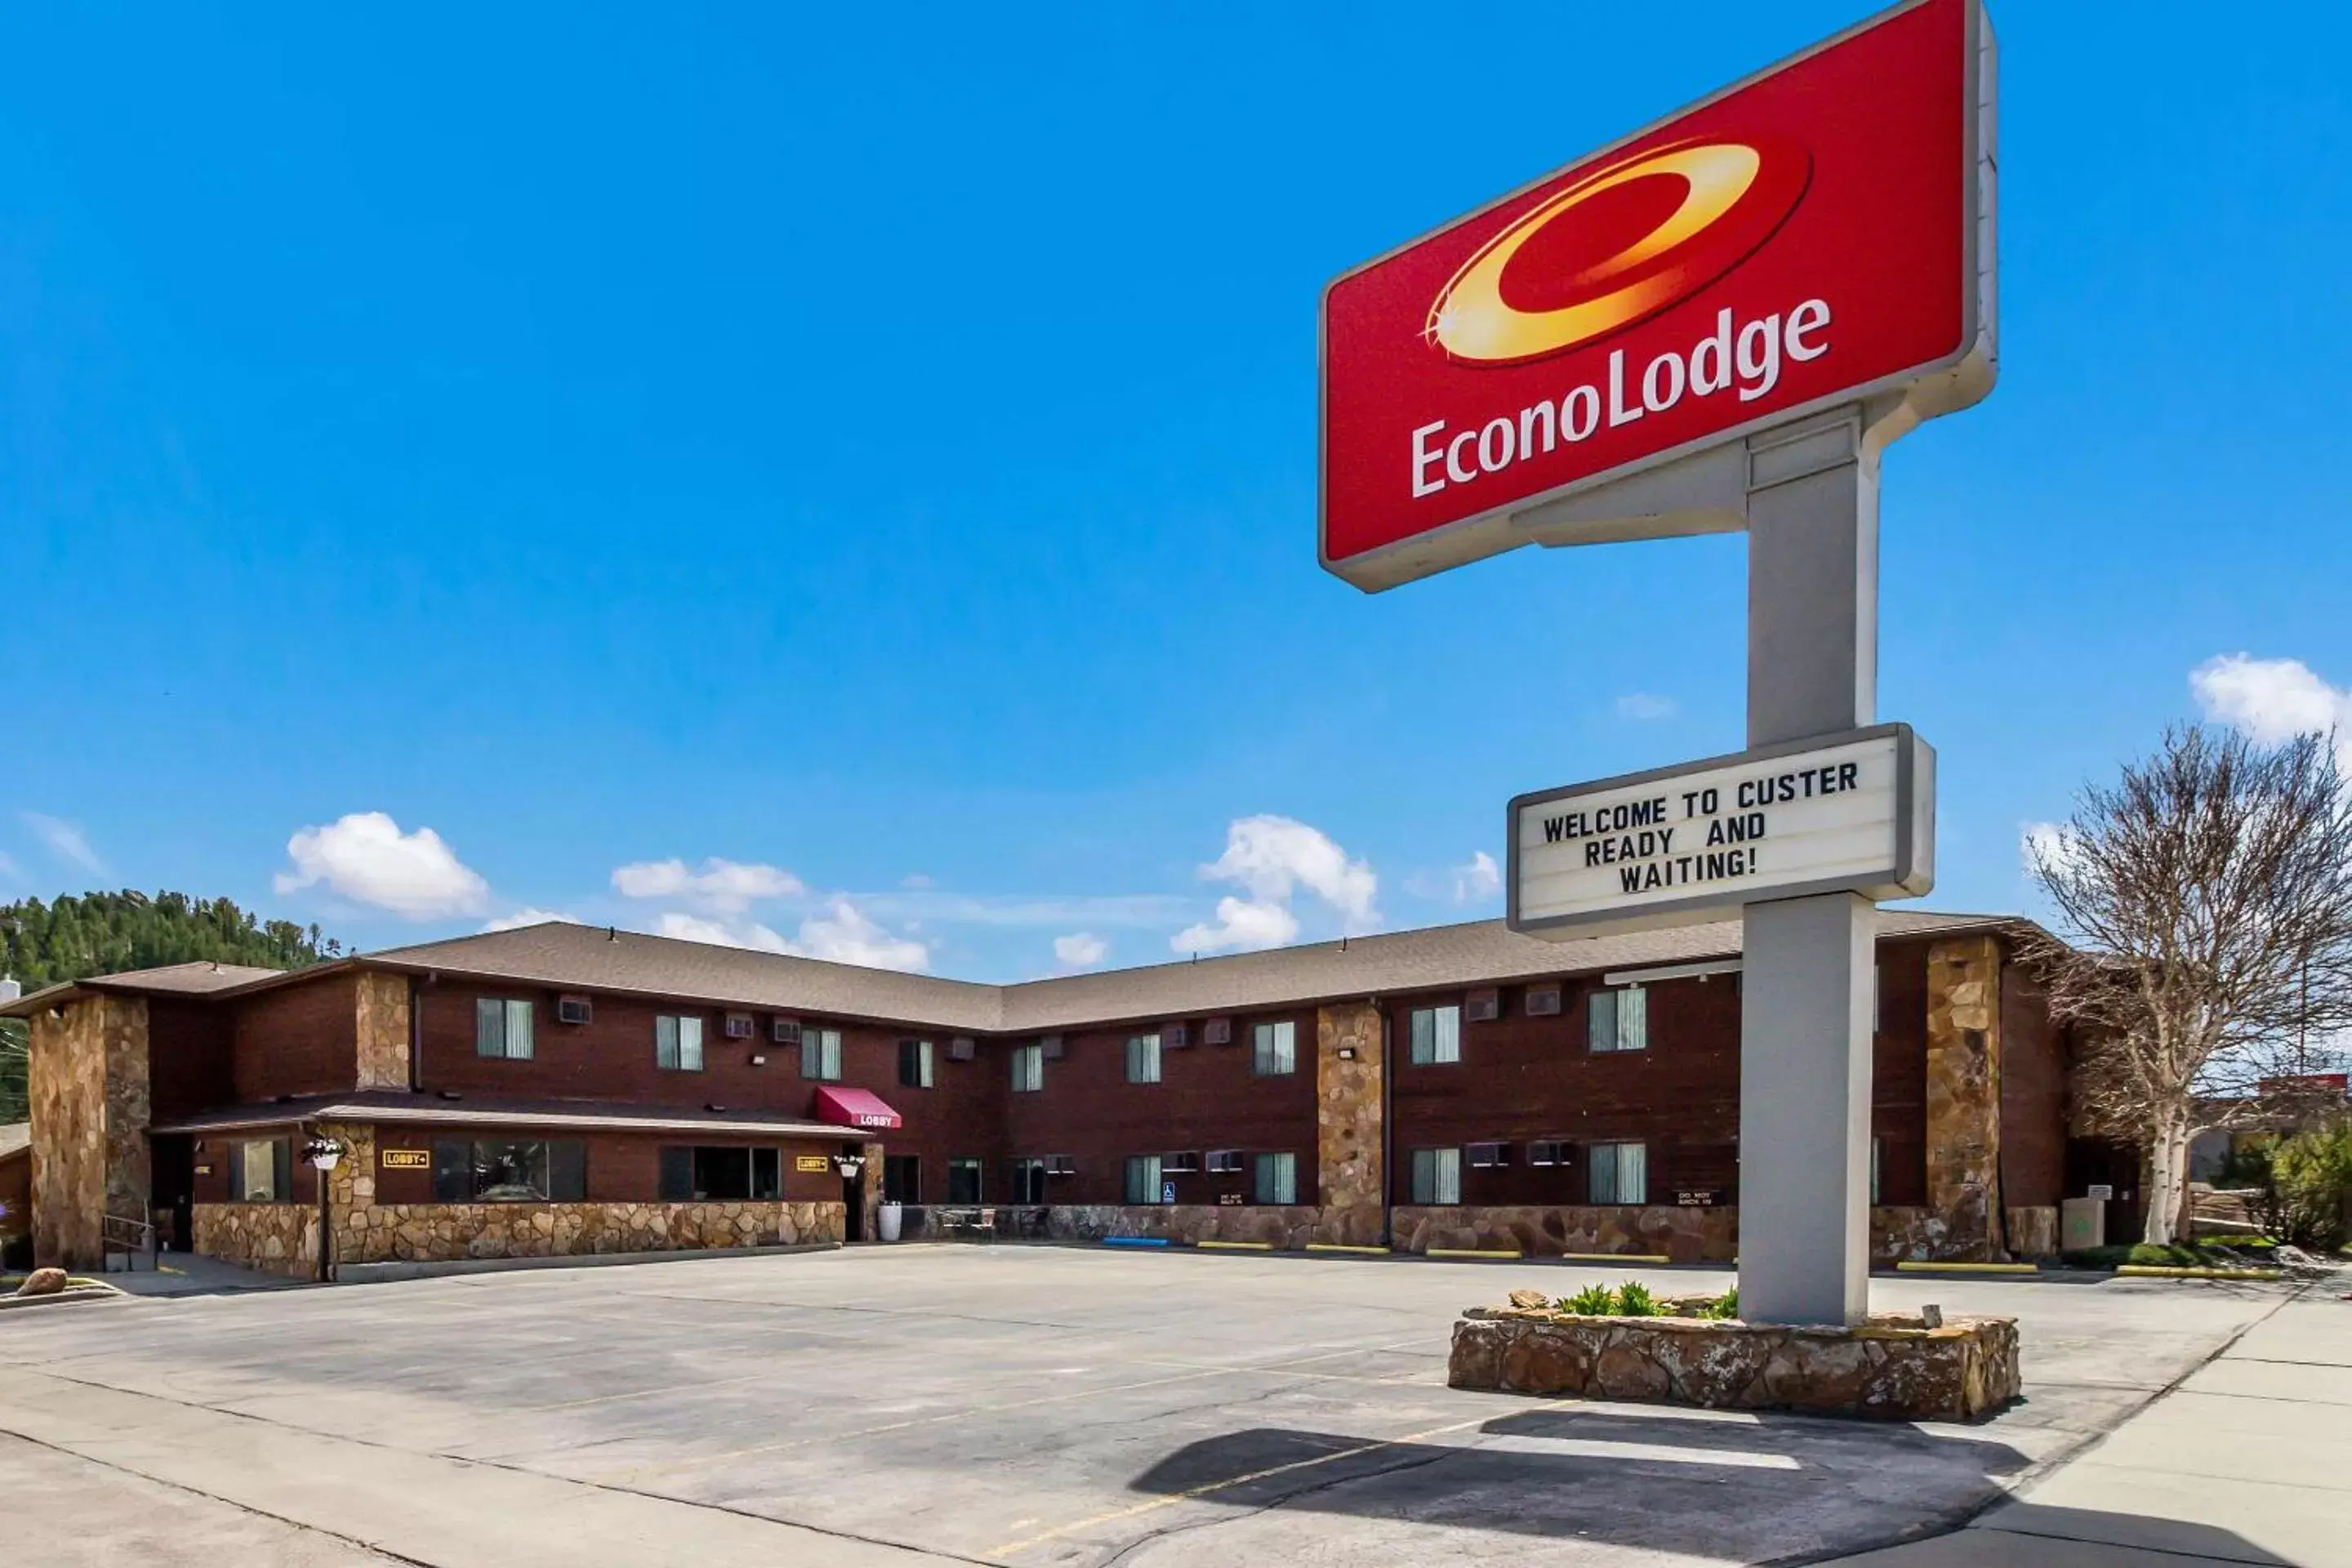 Property building in Econo Lodge, Downtown Custer Near Custer State Park and Mt Rushmore